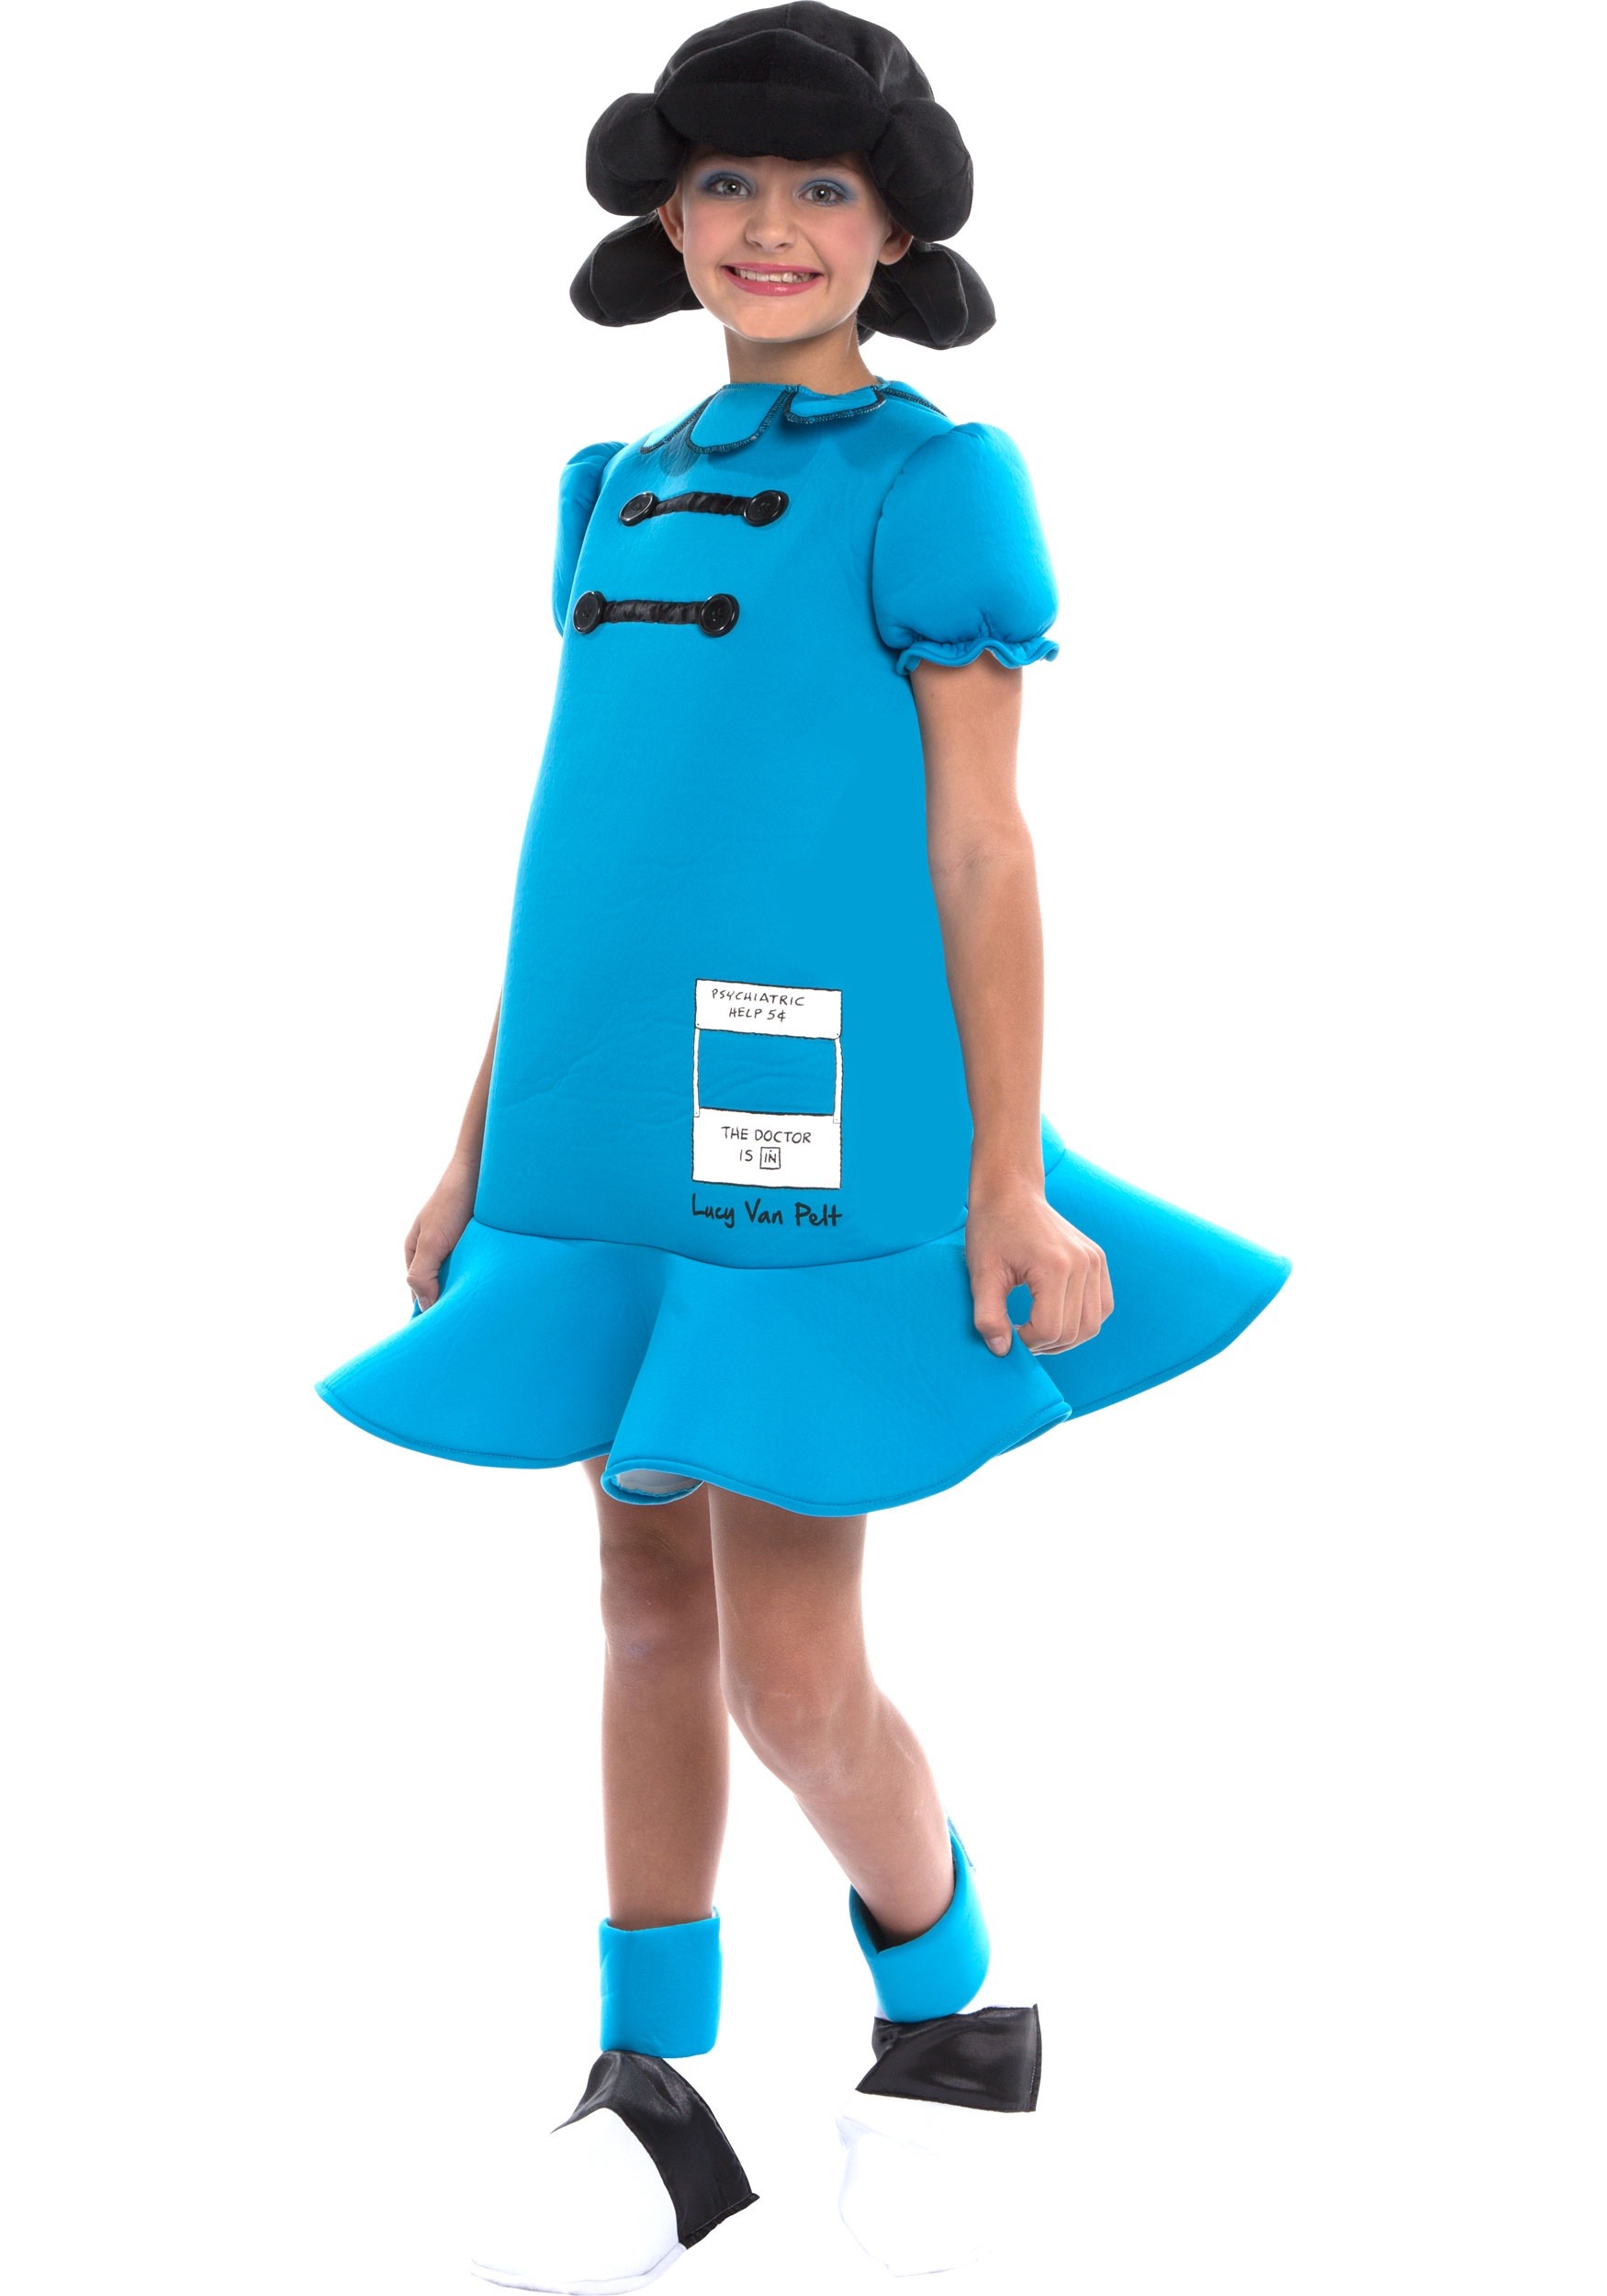 Costume BLUE Dress Halloween Costume Ideas Peanuts Lucy Costume for Girls F...